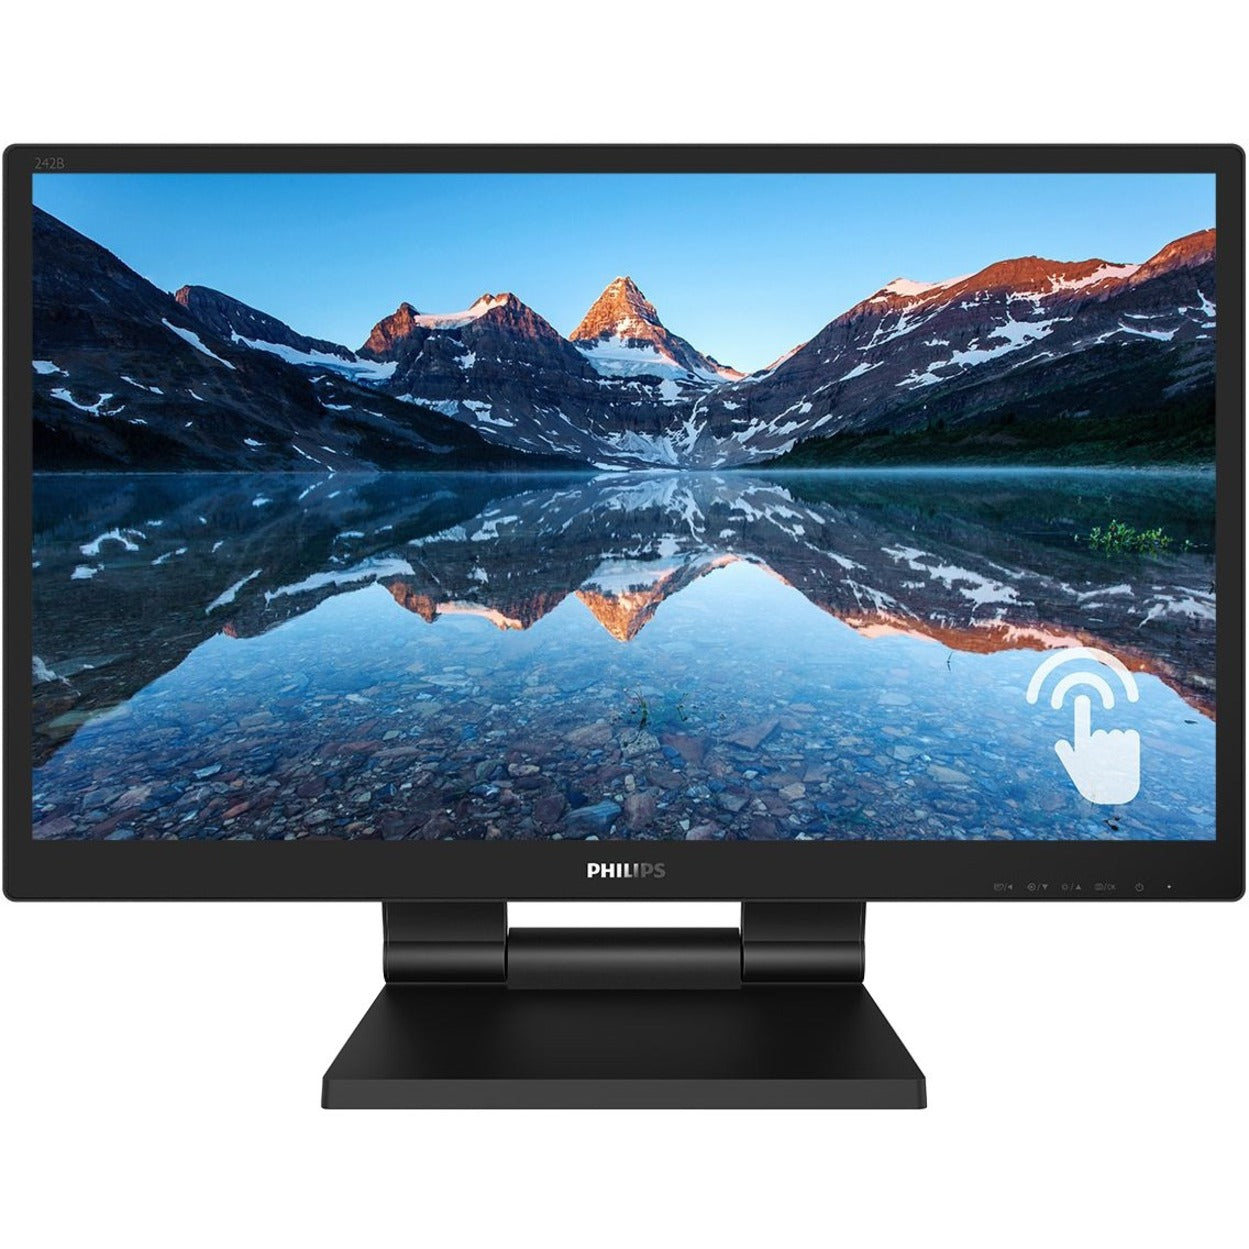 Philips 242B9T 23.8" LCD Touchscreen Monitor - 16:9 - 5 ms GTG (242B9T/27) Front image